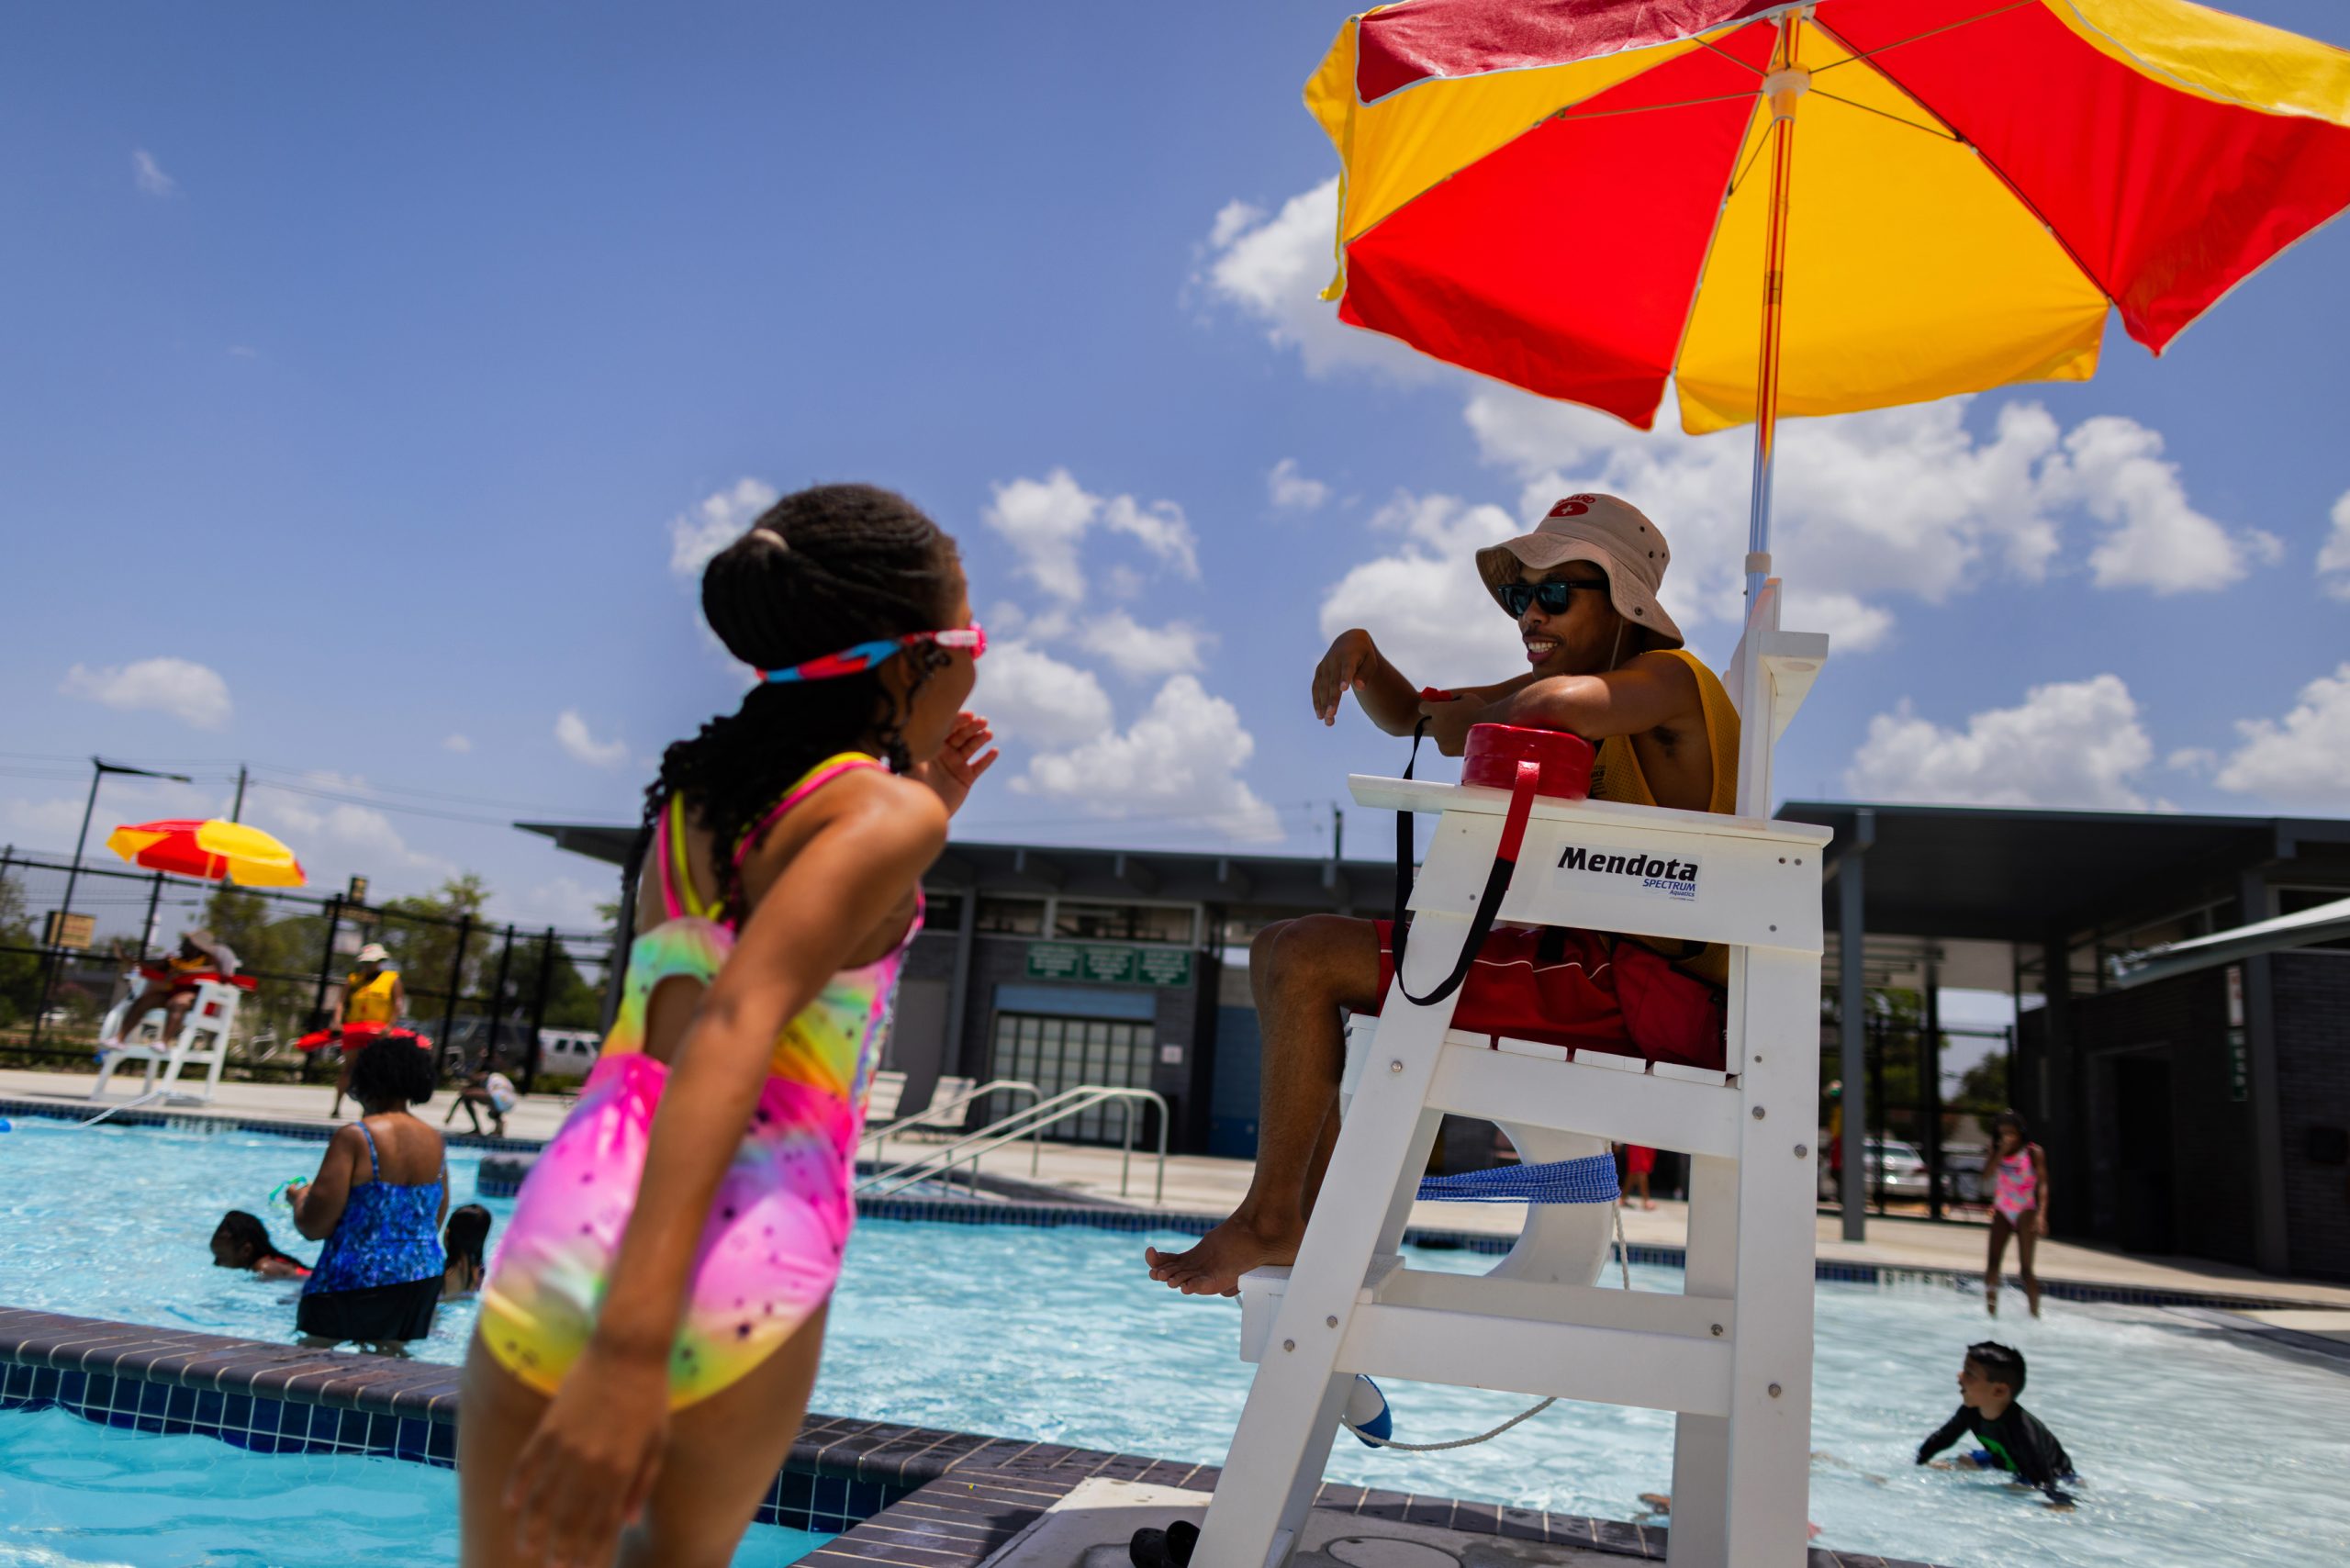 Alief Neighborhood Center and Park pool lifeguard Tariq Hamid, 16, talks to a young bather while on duty.